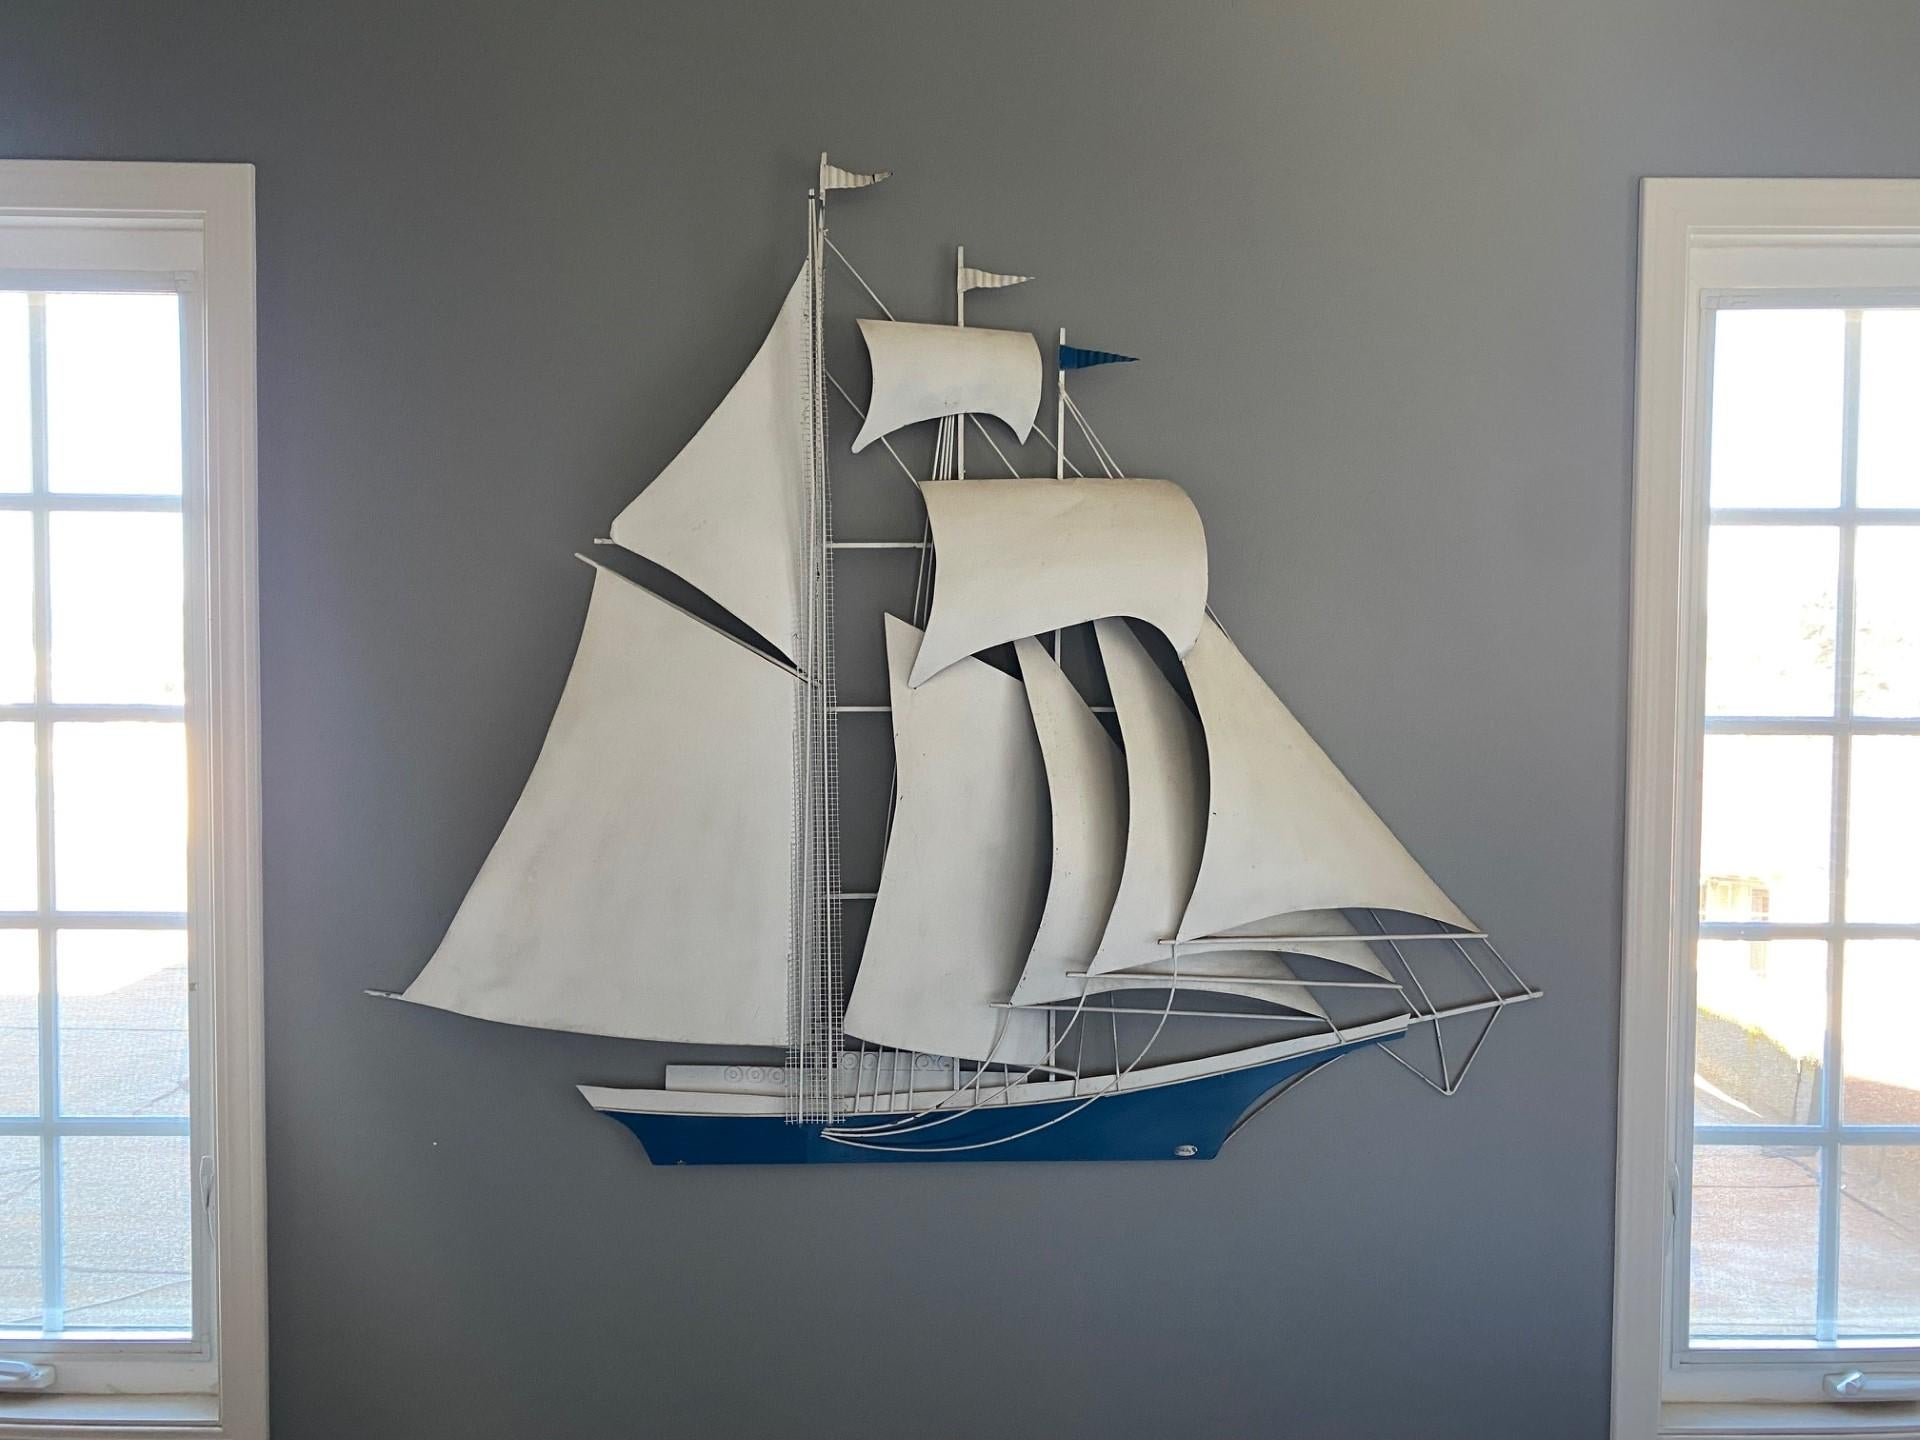 Mid-Century metal wall sculpture signed by artist Wiley. Beautiful design that floats majestically with easy and simplicity. The sculpture is light to the eye while complex in design and construction. The nautical theme is highlighted with shades of